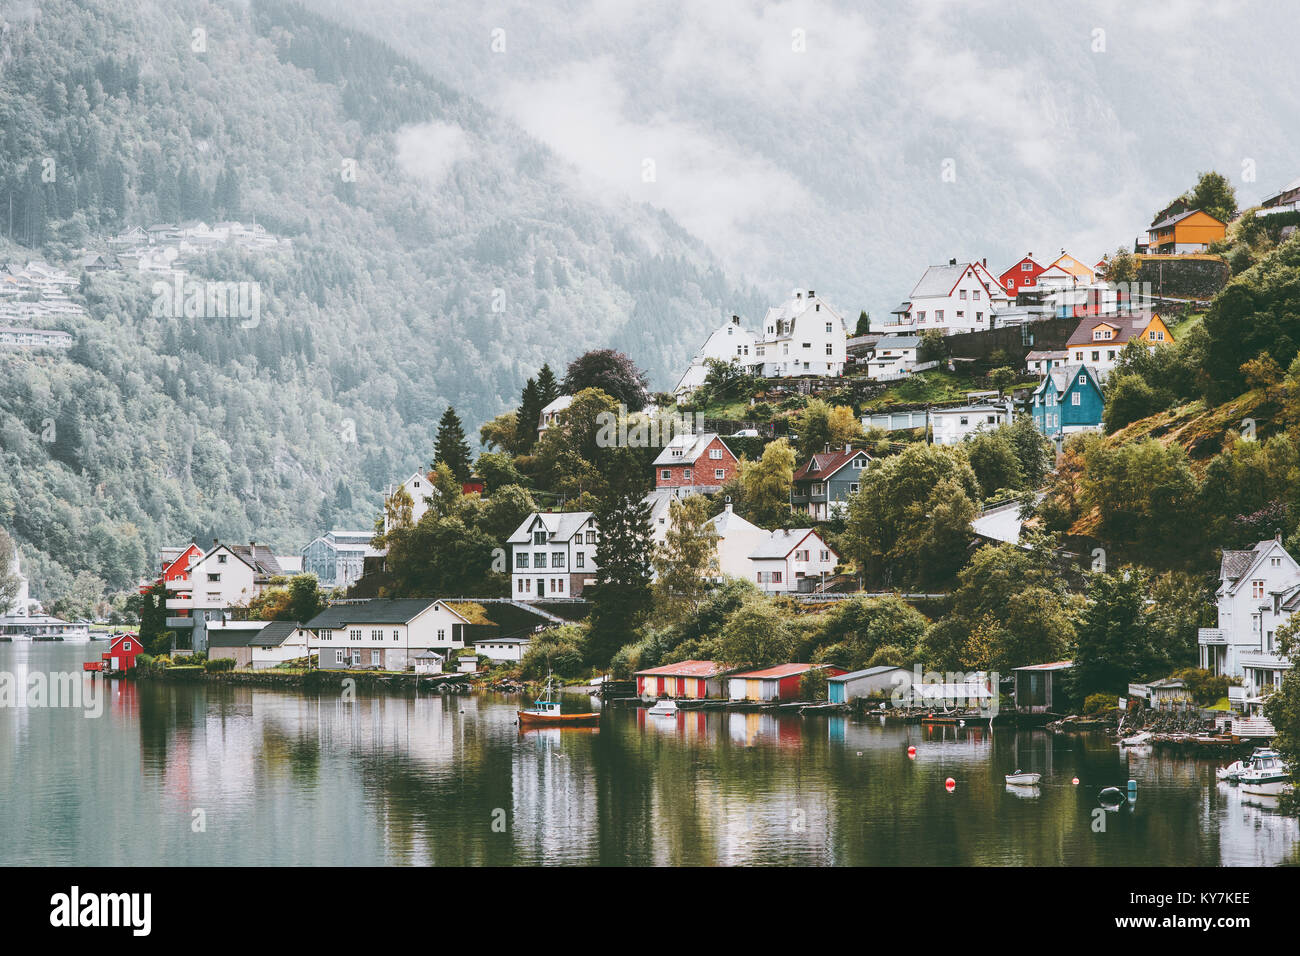 Odda city houses in Norway Landscape foggy mountains and water reflection Stock Photo